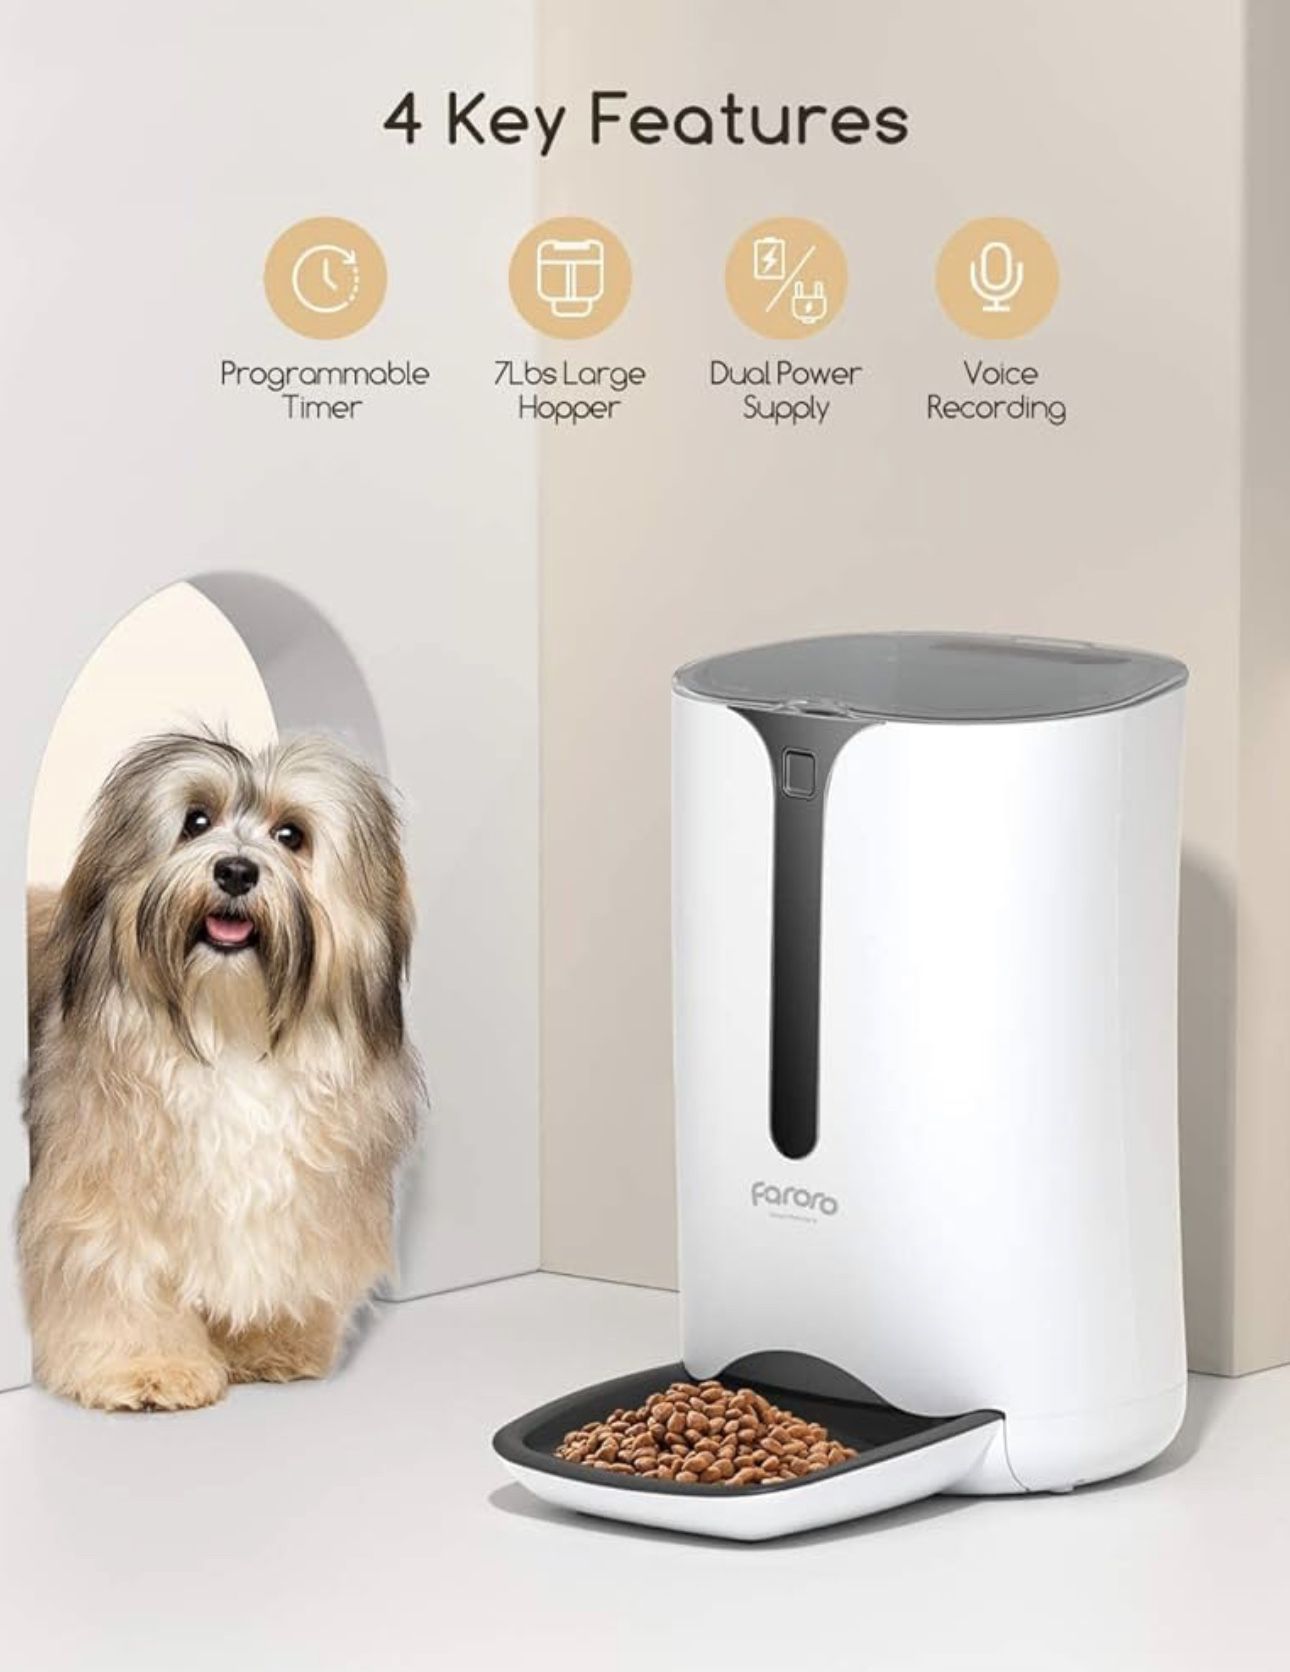 Automatic Cat Feeder, Faroro Dog Food Dispenser for Small Pets with Distribution Alarms, Portion Control, Voice Recorder and Programmable Timer for up